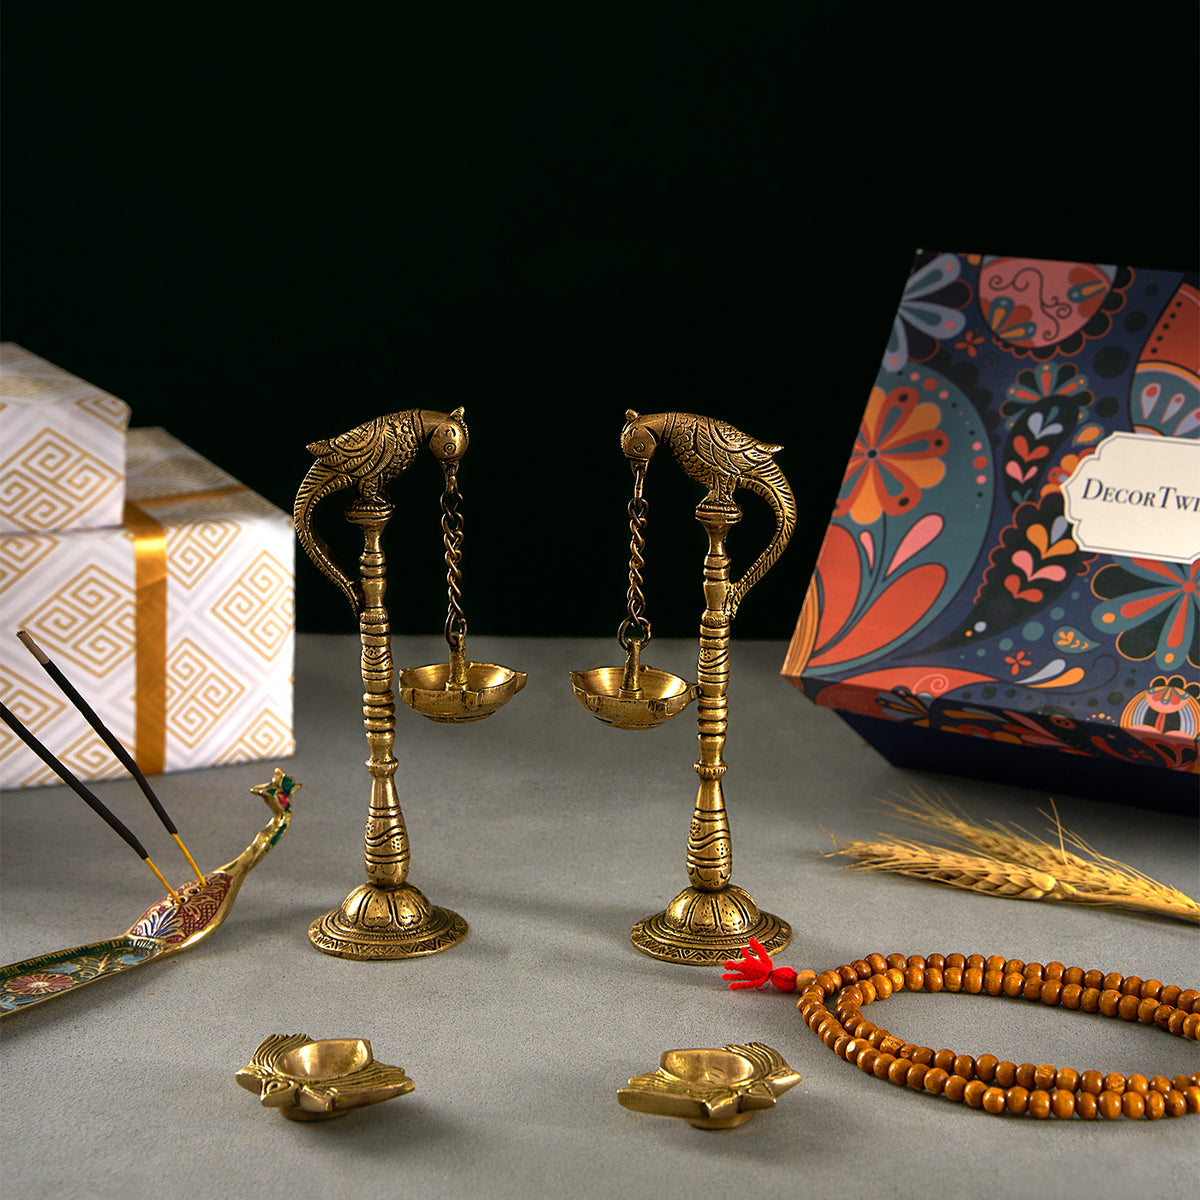 Brass Parrots Oil Lamps, Peacock Incense Stick Holder and Lotus Diya set of 2 With Gift box